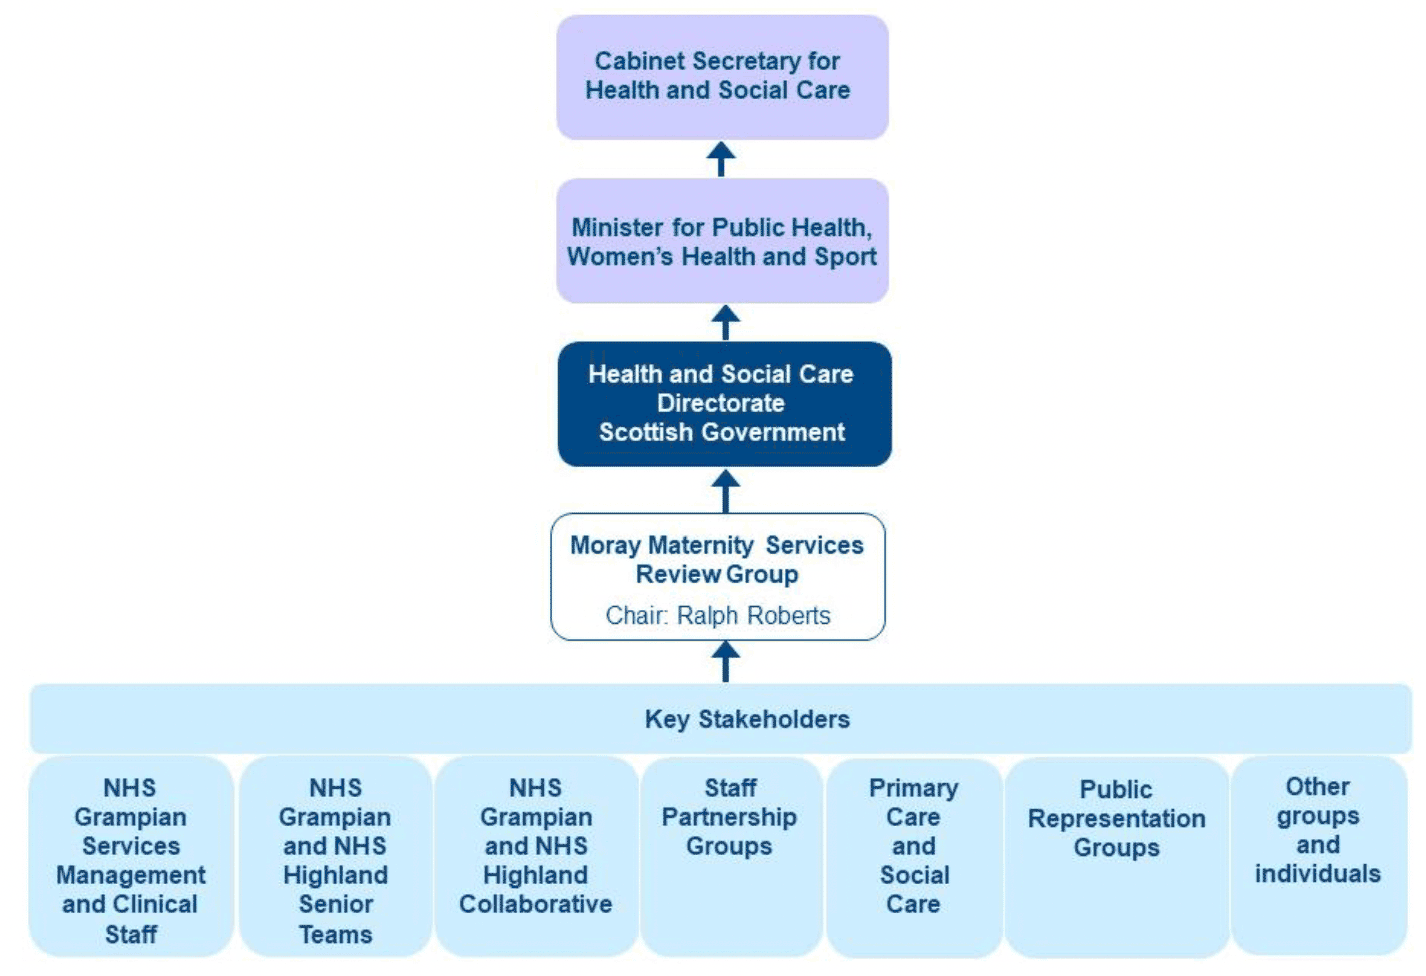 The Governance Chart lays out the governance arrangements for the purpose and duration of the Moray Maternity Services Review.  It illustrates how Key Stakeholders inform the Review Group, which is Chaired by Ralph Roberts.  Key Stakeholders detailed are: NHS Grampian Services Management and Clinical Staff; NHS Grampian and NHS Highland Senior Teams; NHS Grampian and NHS Highland Collaborative; Staff Partnership Groups; Primary Care and Social Care: Public Representation Groups, and other groups and individuals.  The Review Group reports into the Health and Social Care Directorate at the Scottish Government, which in turn reports to the Minister for Public Health, Women’s Health and Sport.  The Minister for Public Health, Women’s Health and Sport in turn reports into the Cabinet Secretary for Health and Social Care.